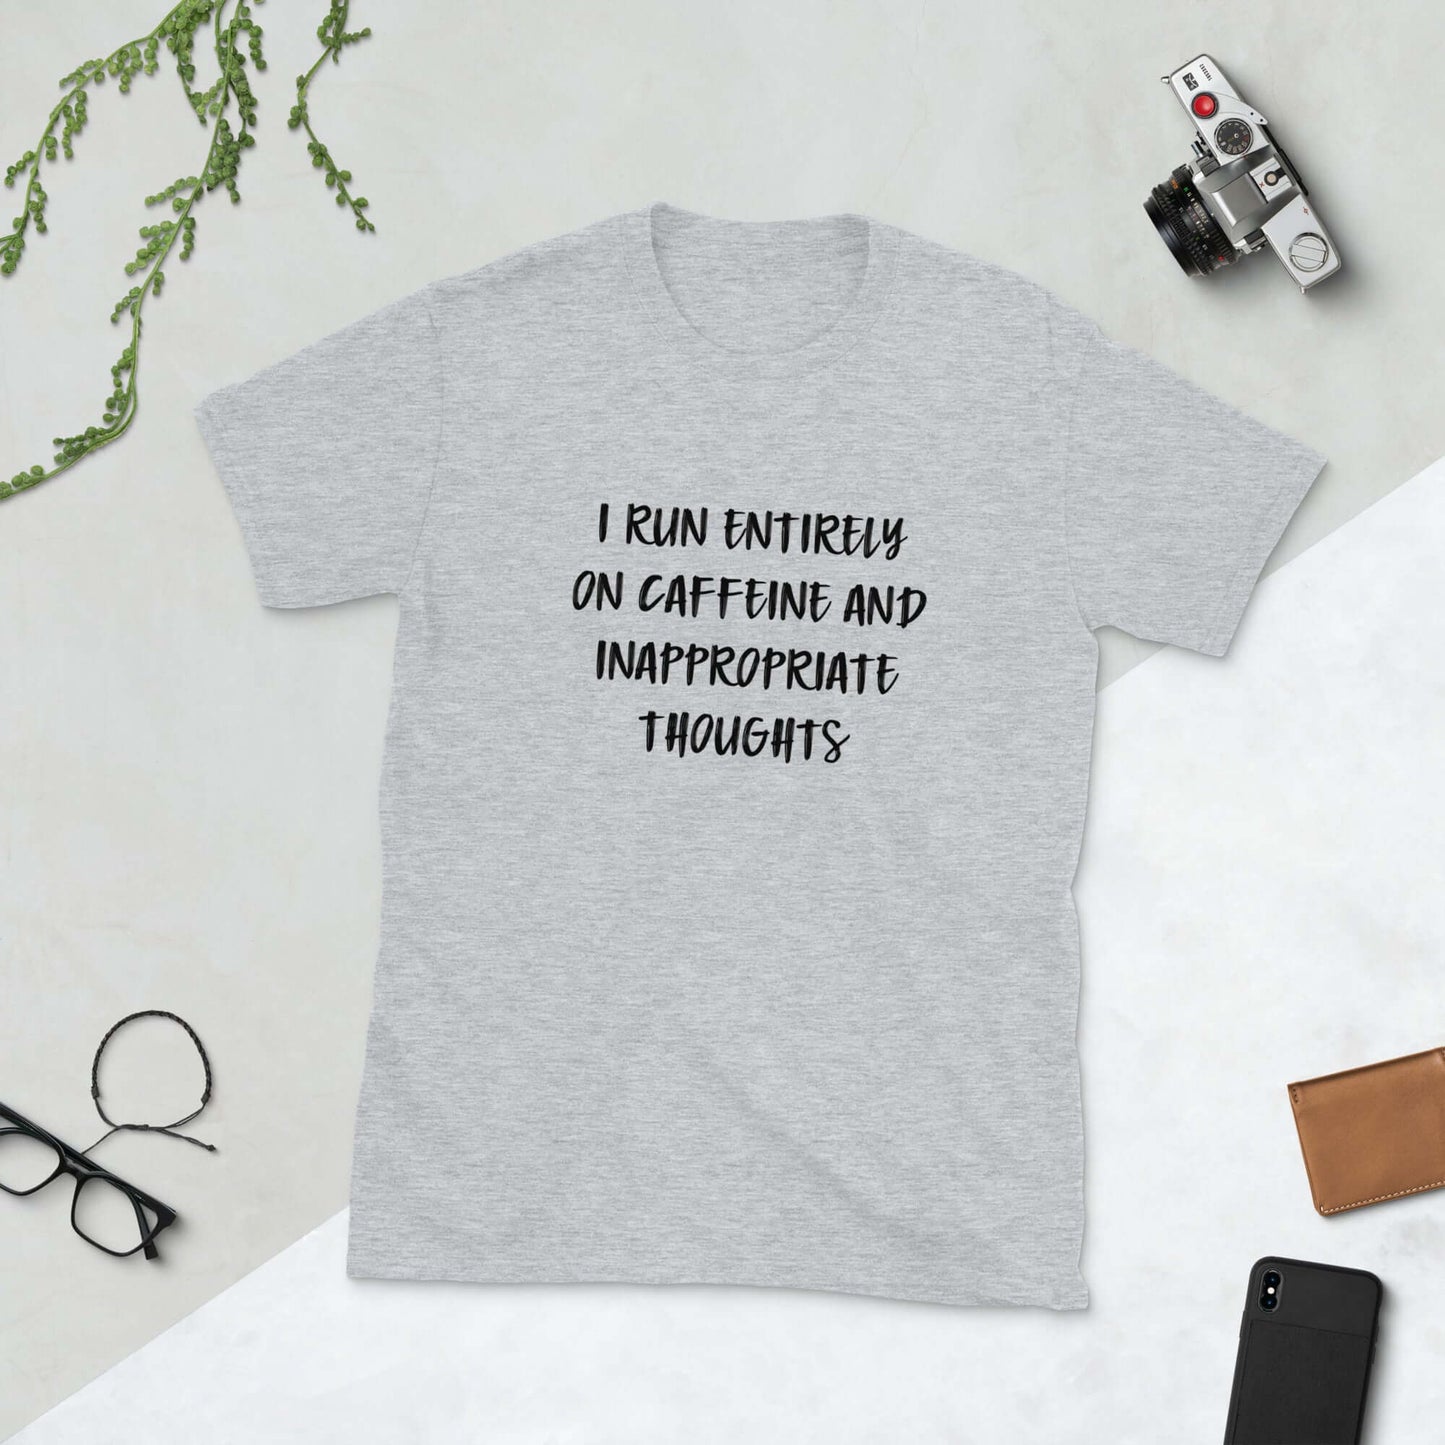 Light sport grey t-shirt with the words I run entirely on caffeine & inappropriate thoughts printed on the front.